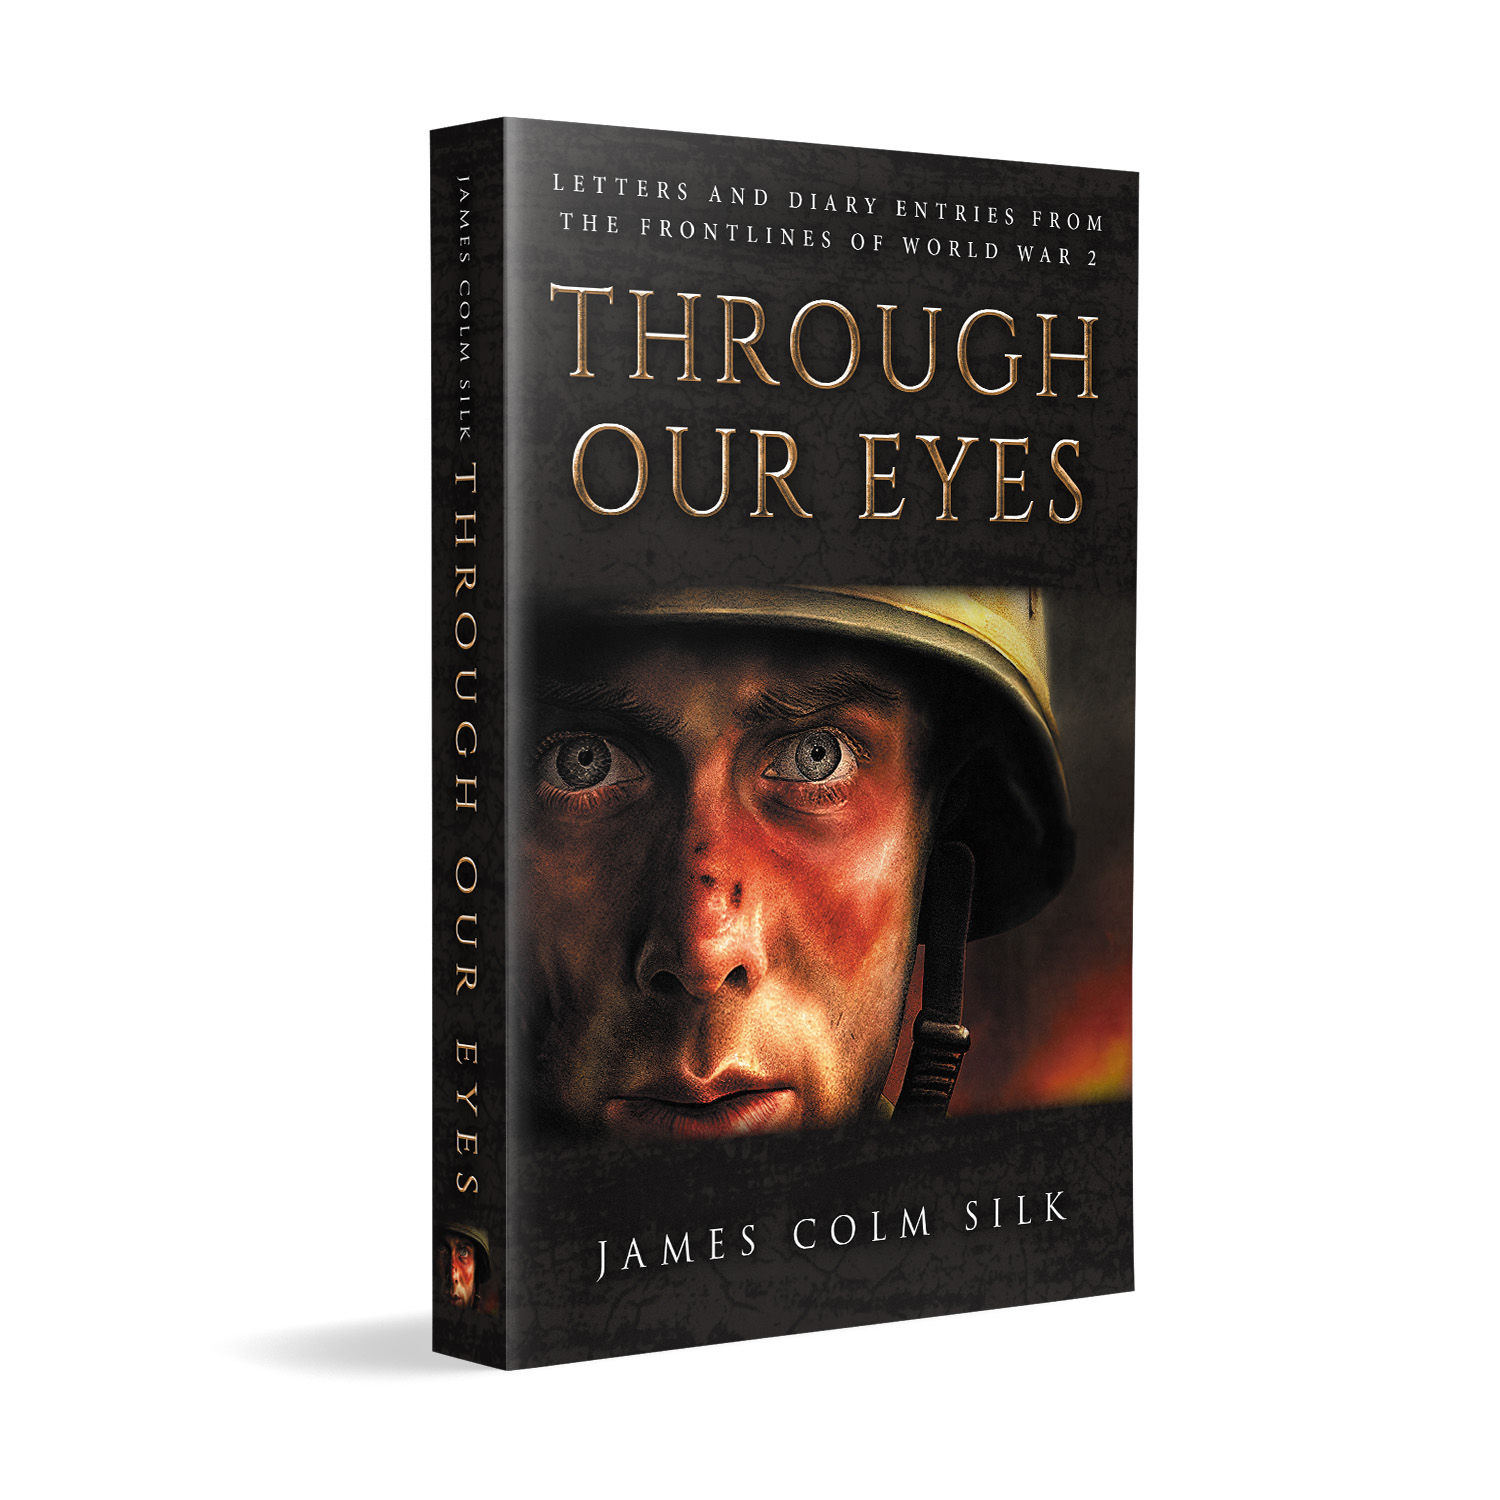 'Through Our Eyes' is a rare military historical book cover design demo by Mark Thomas. To learn more about what Mark could do for your book, please visit coverness.com.